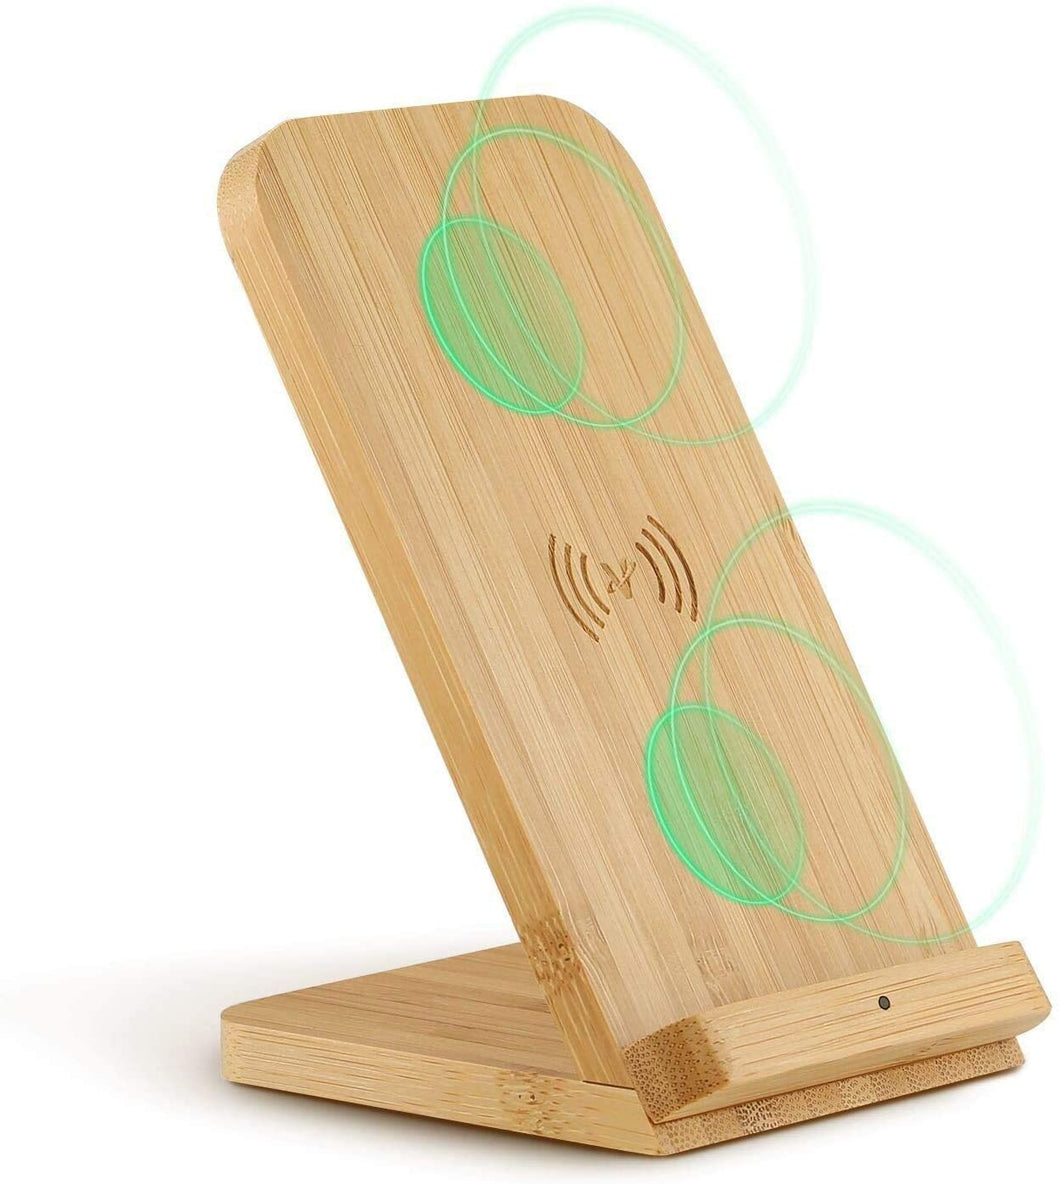 Veelink Bamboo Fast Wireless Charger Stand Wood 10W 2 Coils Compatible with iPhone SE/11/ Xs max/XR/8Plus, Samsung Galaxy Note 9 S20 S10+